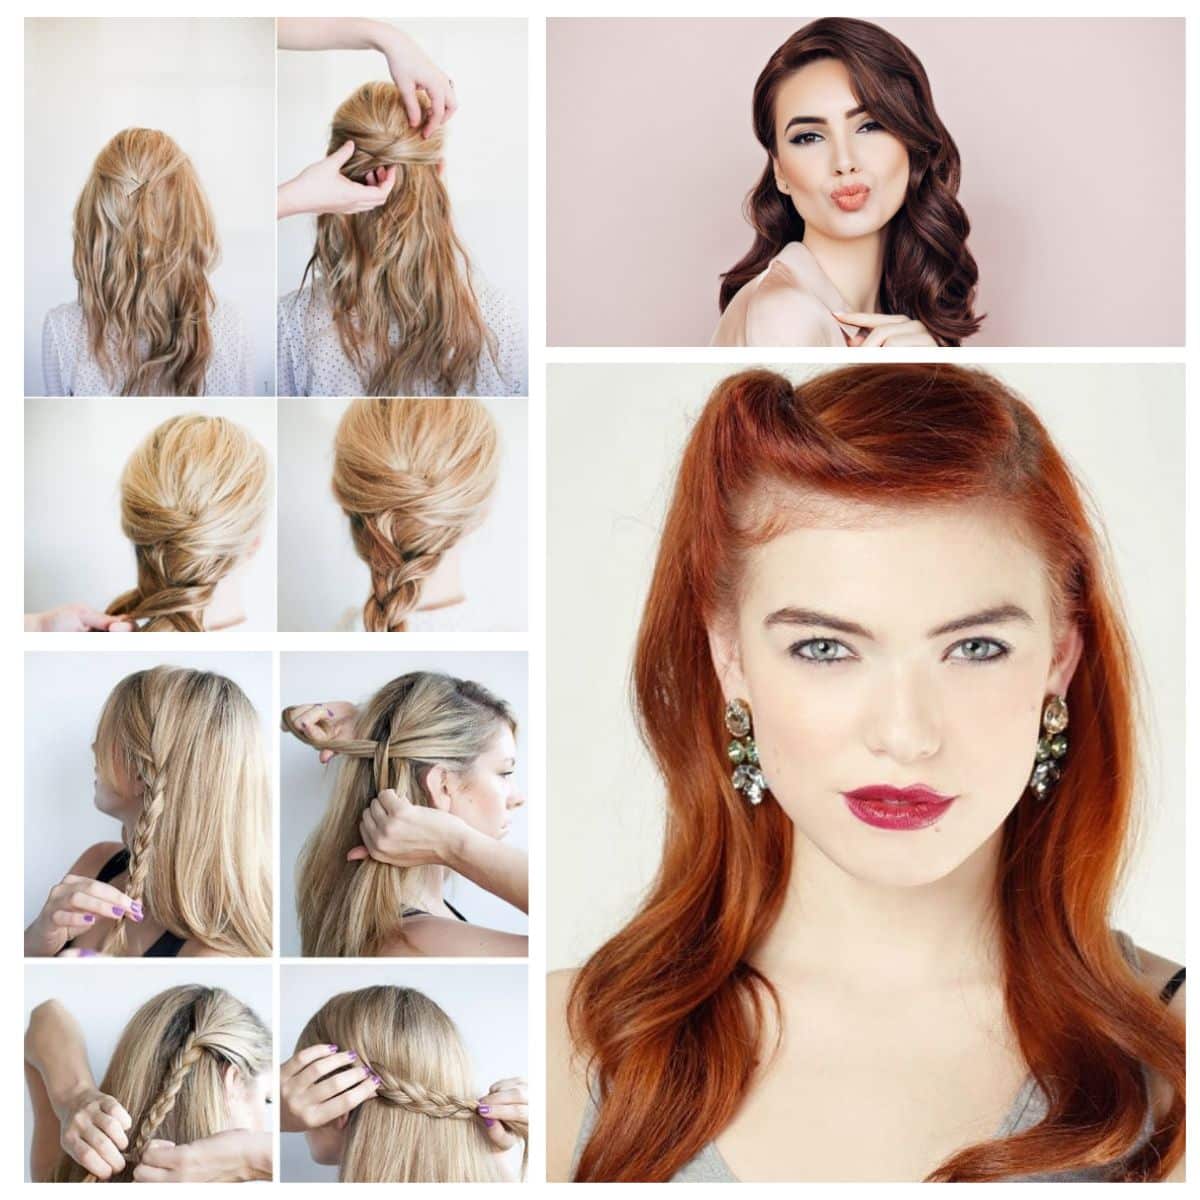 79 5-Minute Hairstyles for School for All Ages and Hair Lengths